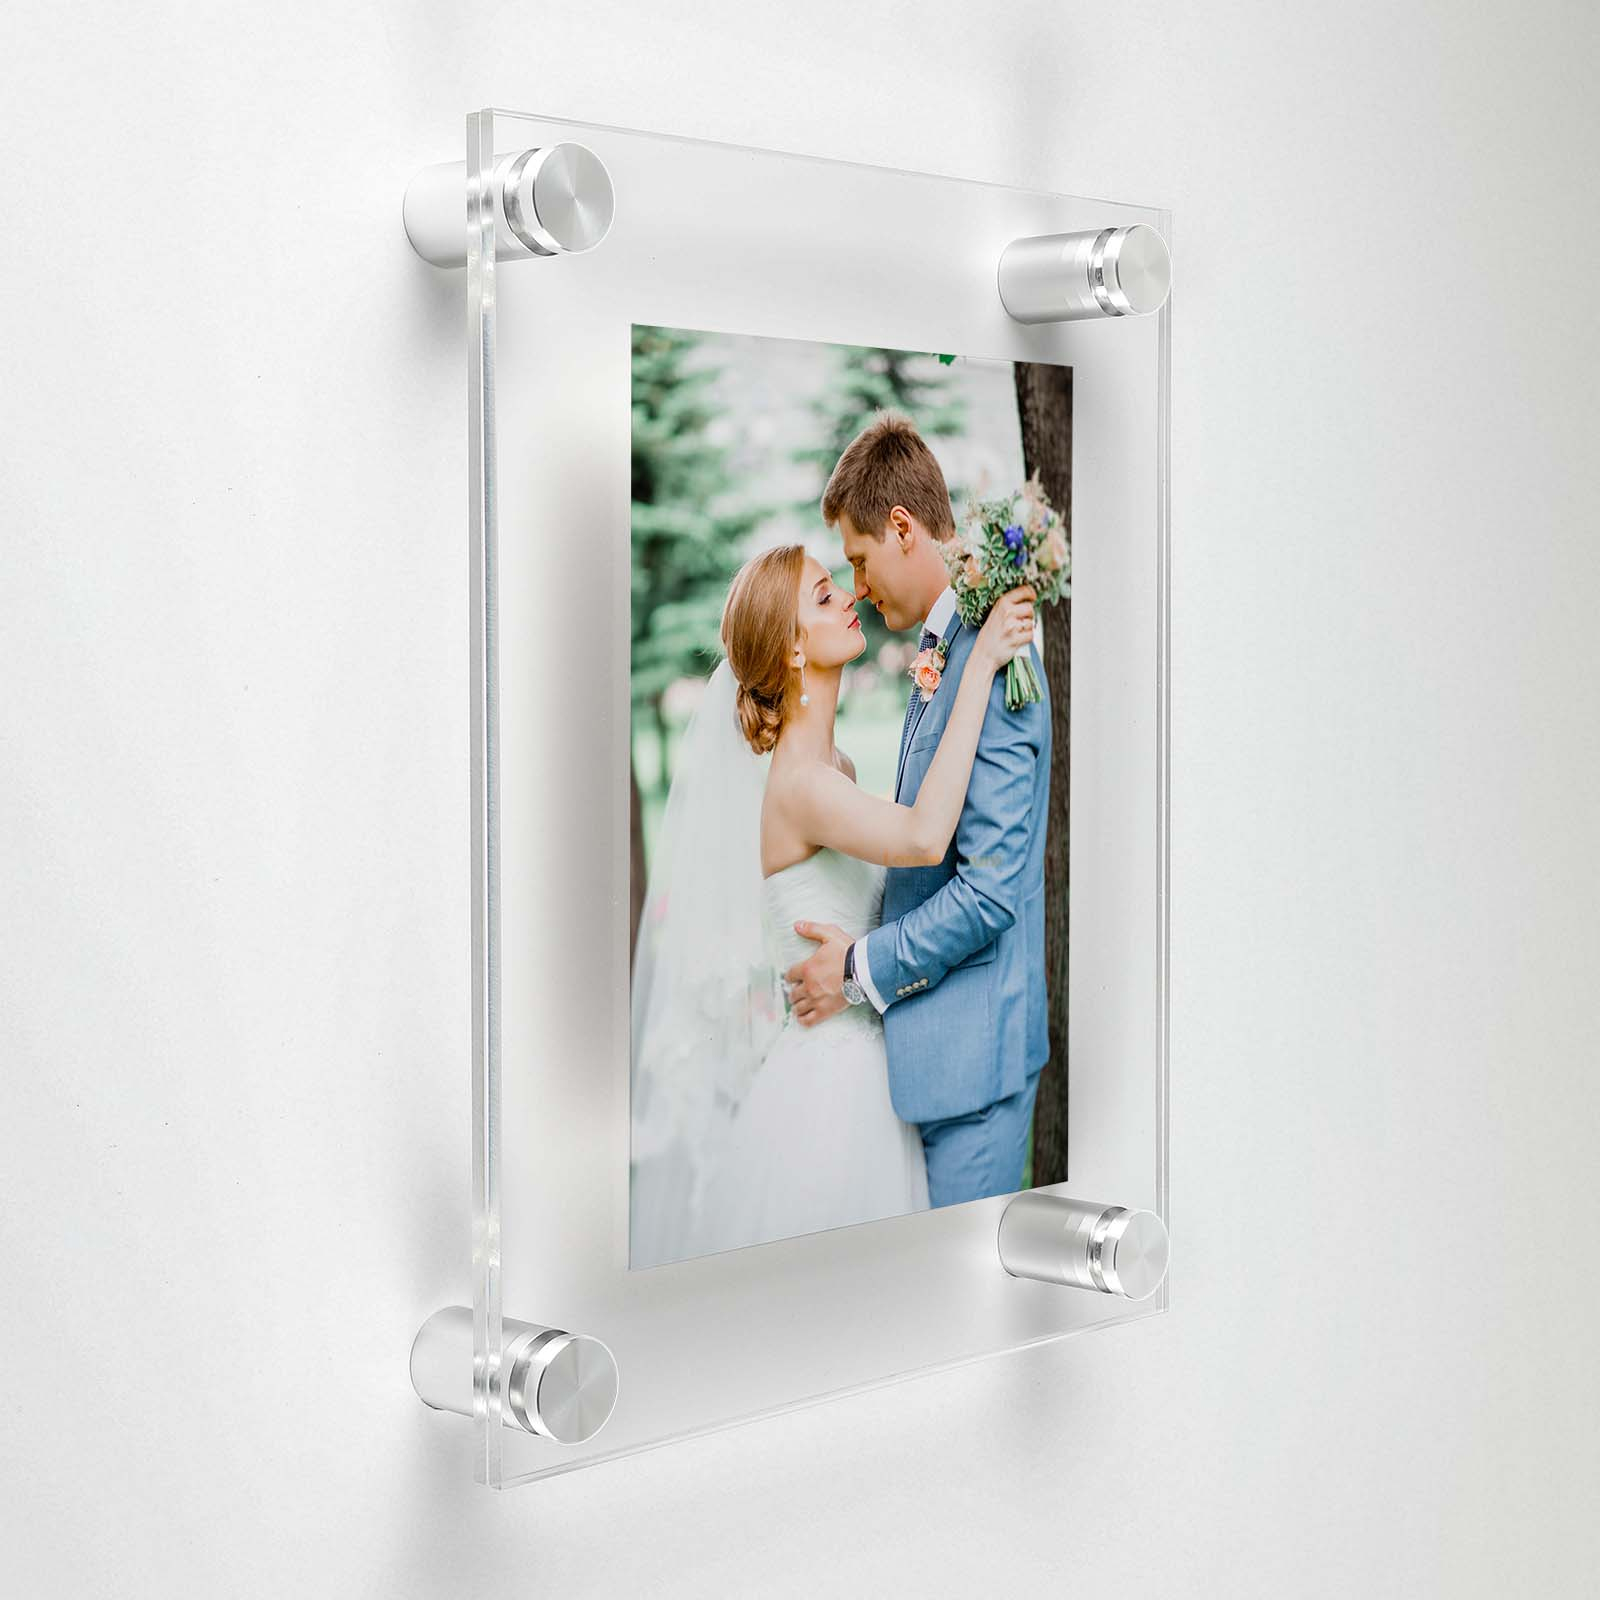 (2) 7-1/2'' x 9-1/2'' Clear Acrylics , Pre-Drilled With Polished Edges (Thick 1/8'' each), Wall Frame with (4) 5/8'' x 3/4'' Silver Anodized Aluminum Standoffs includes Screws and Anchors